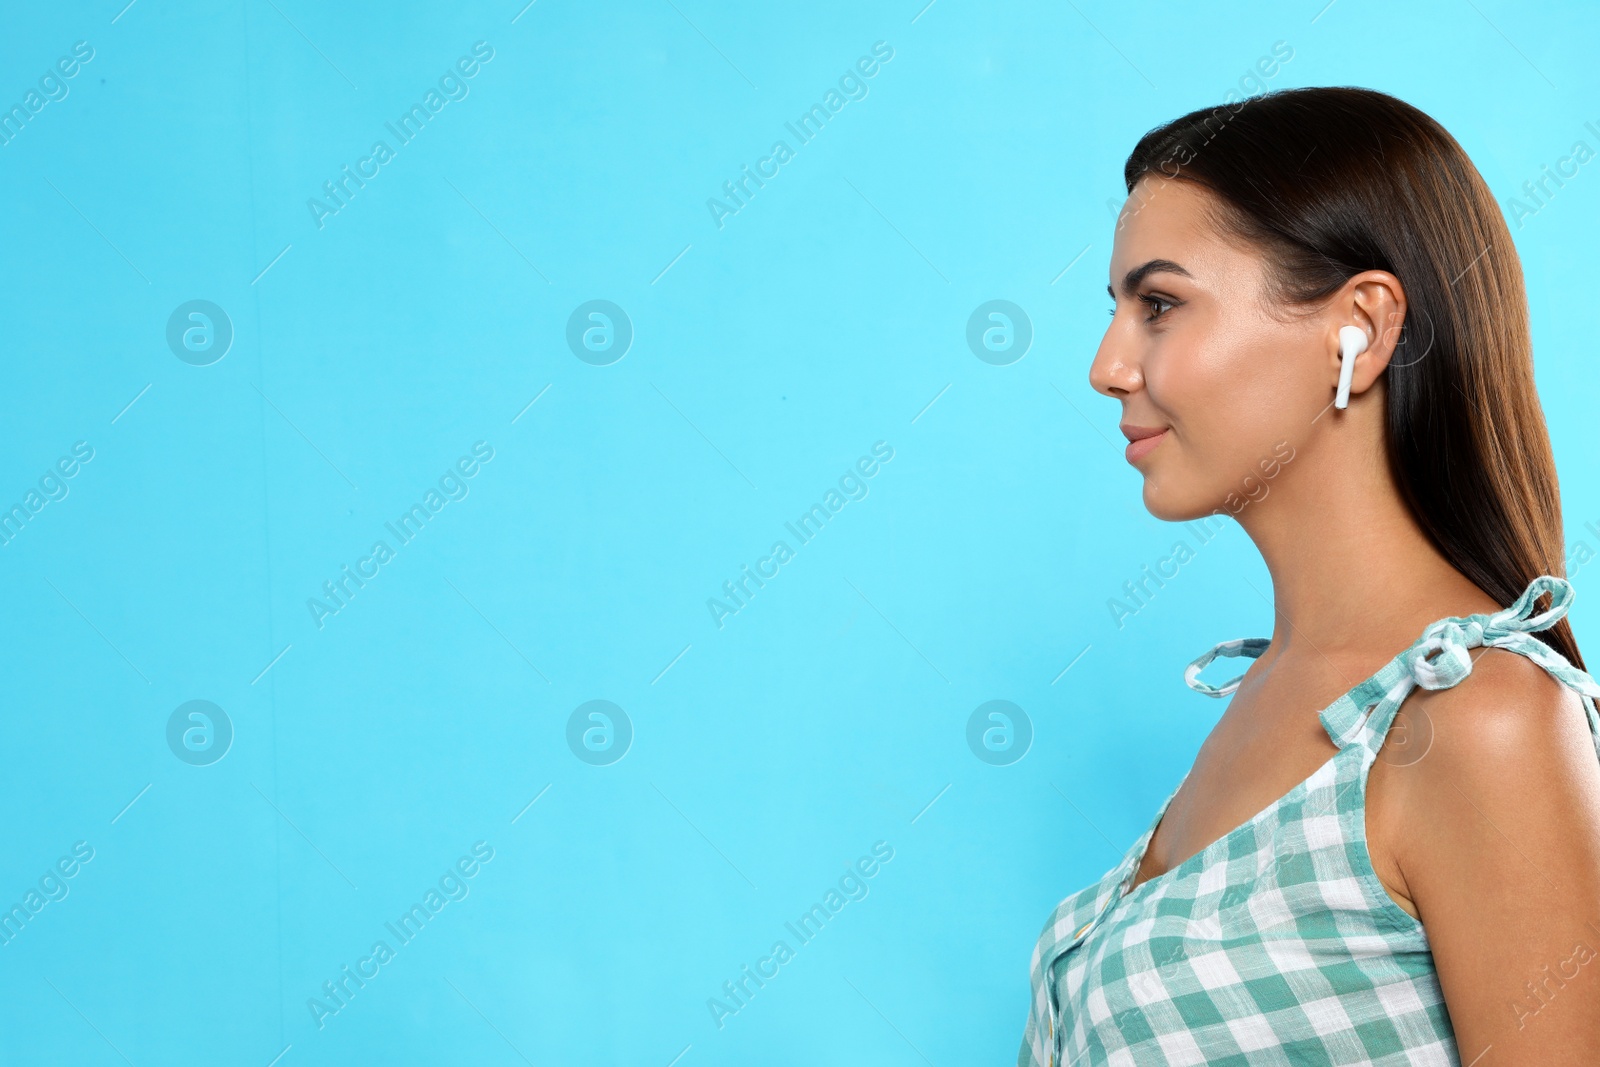 Photo of Young woman listening to music through wireless earphones on light blue background. Space for text